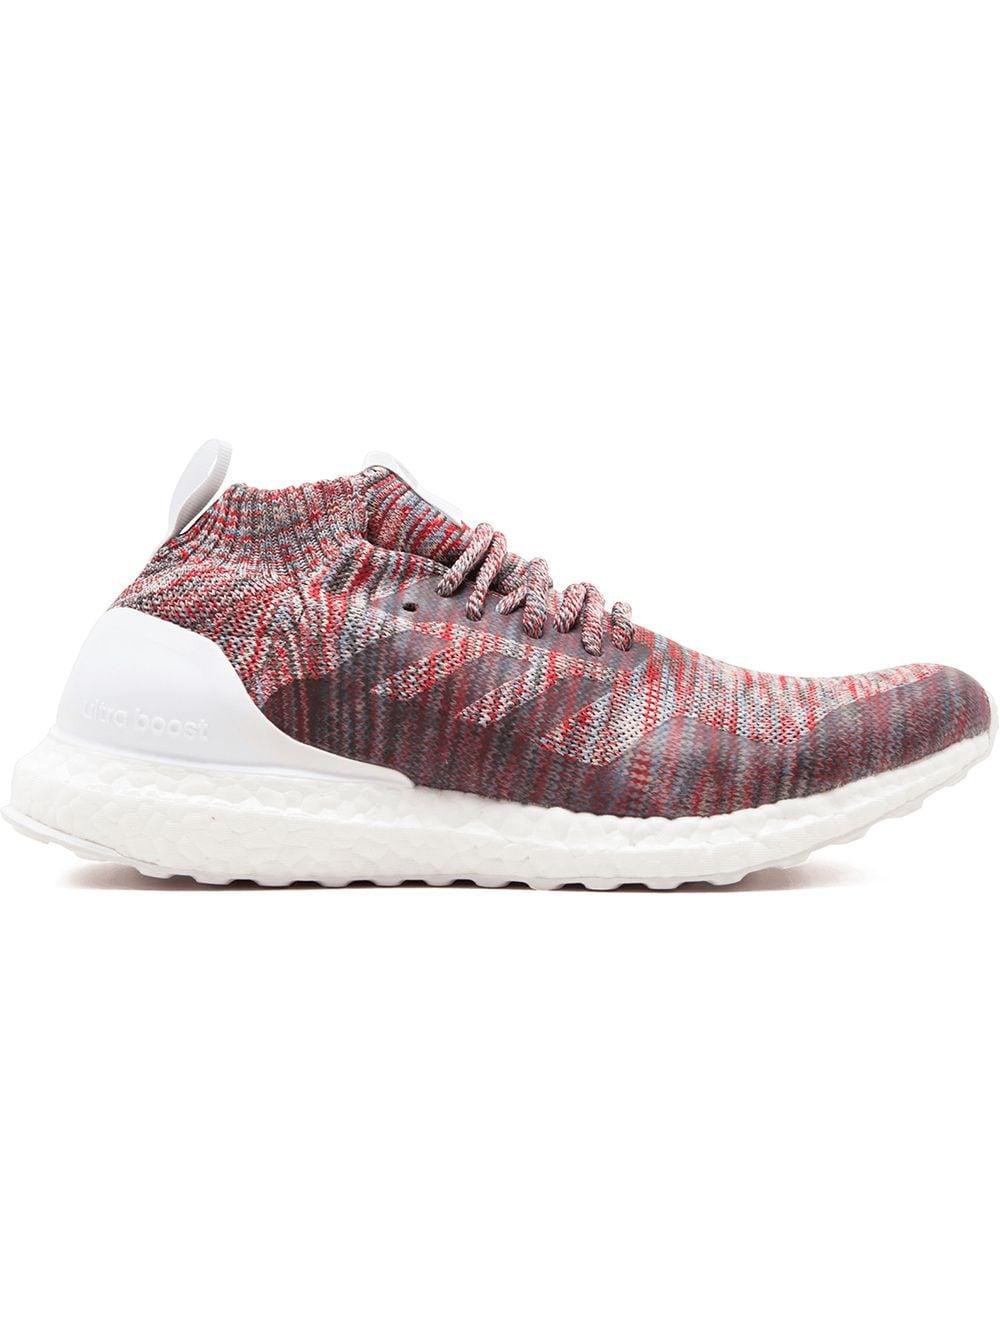 adidas Ultra Boost Mid Kith Sneakers - Lyst